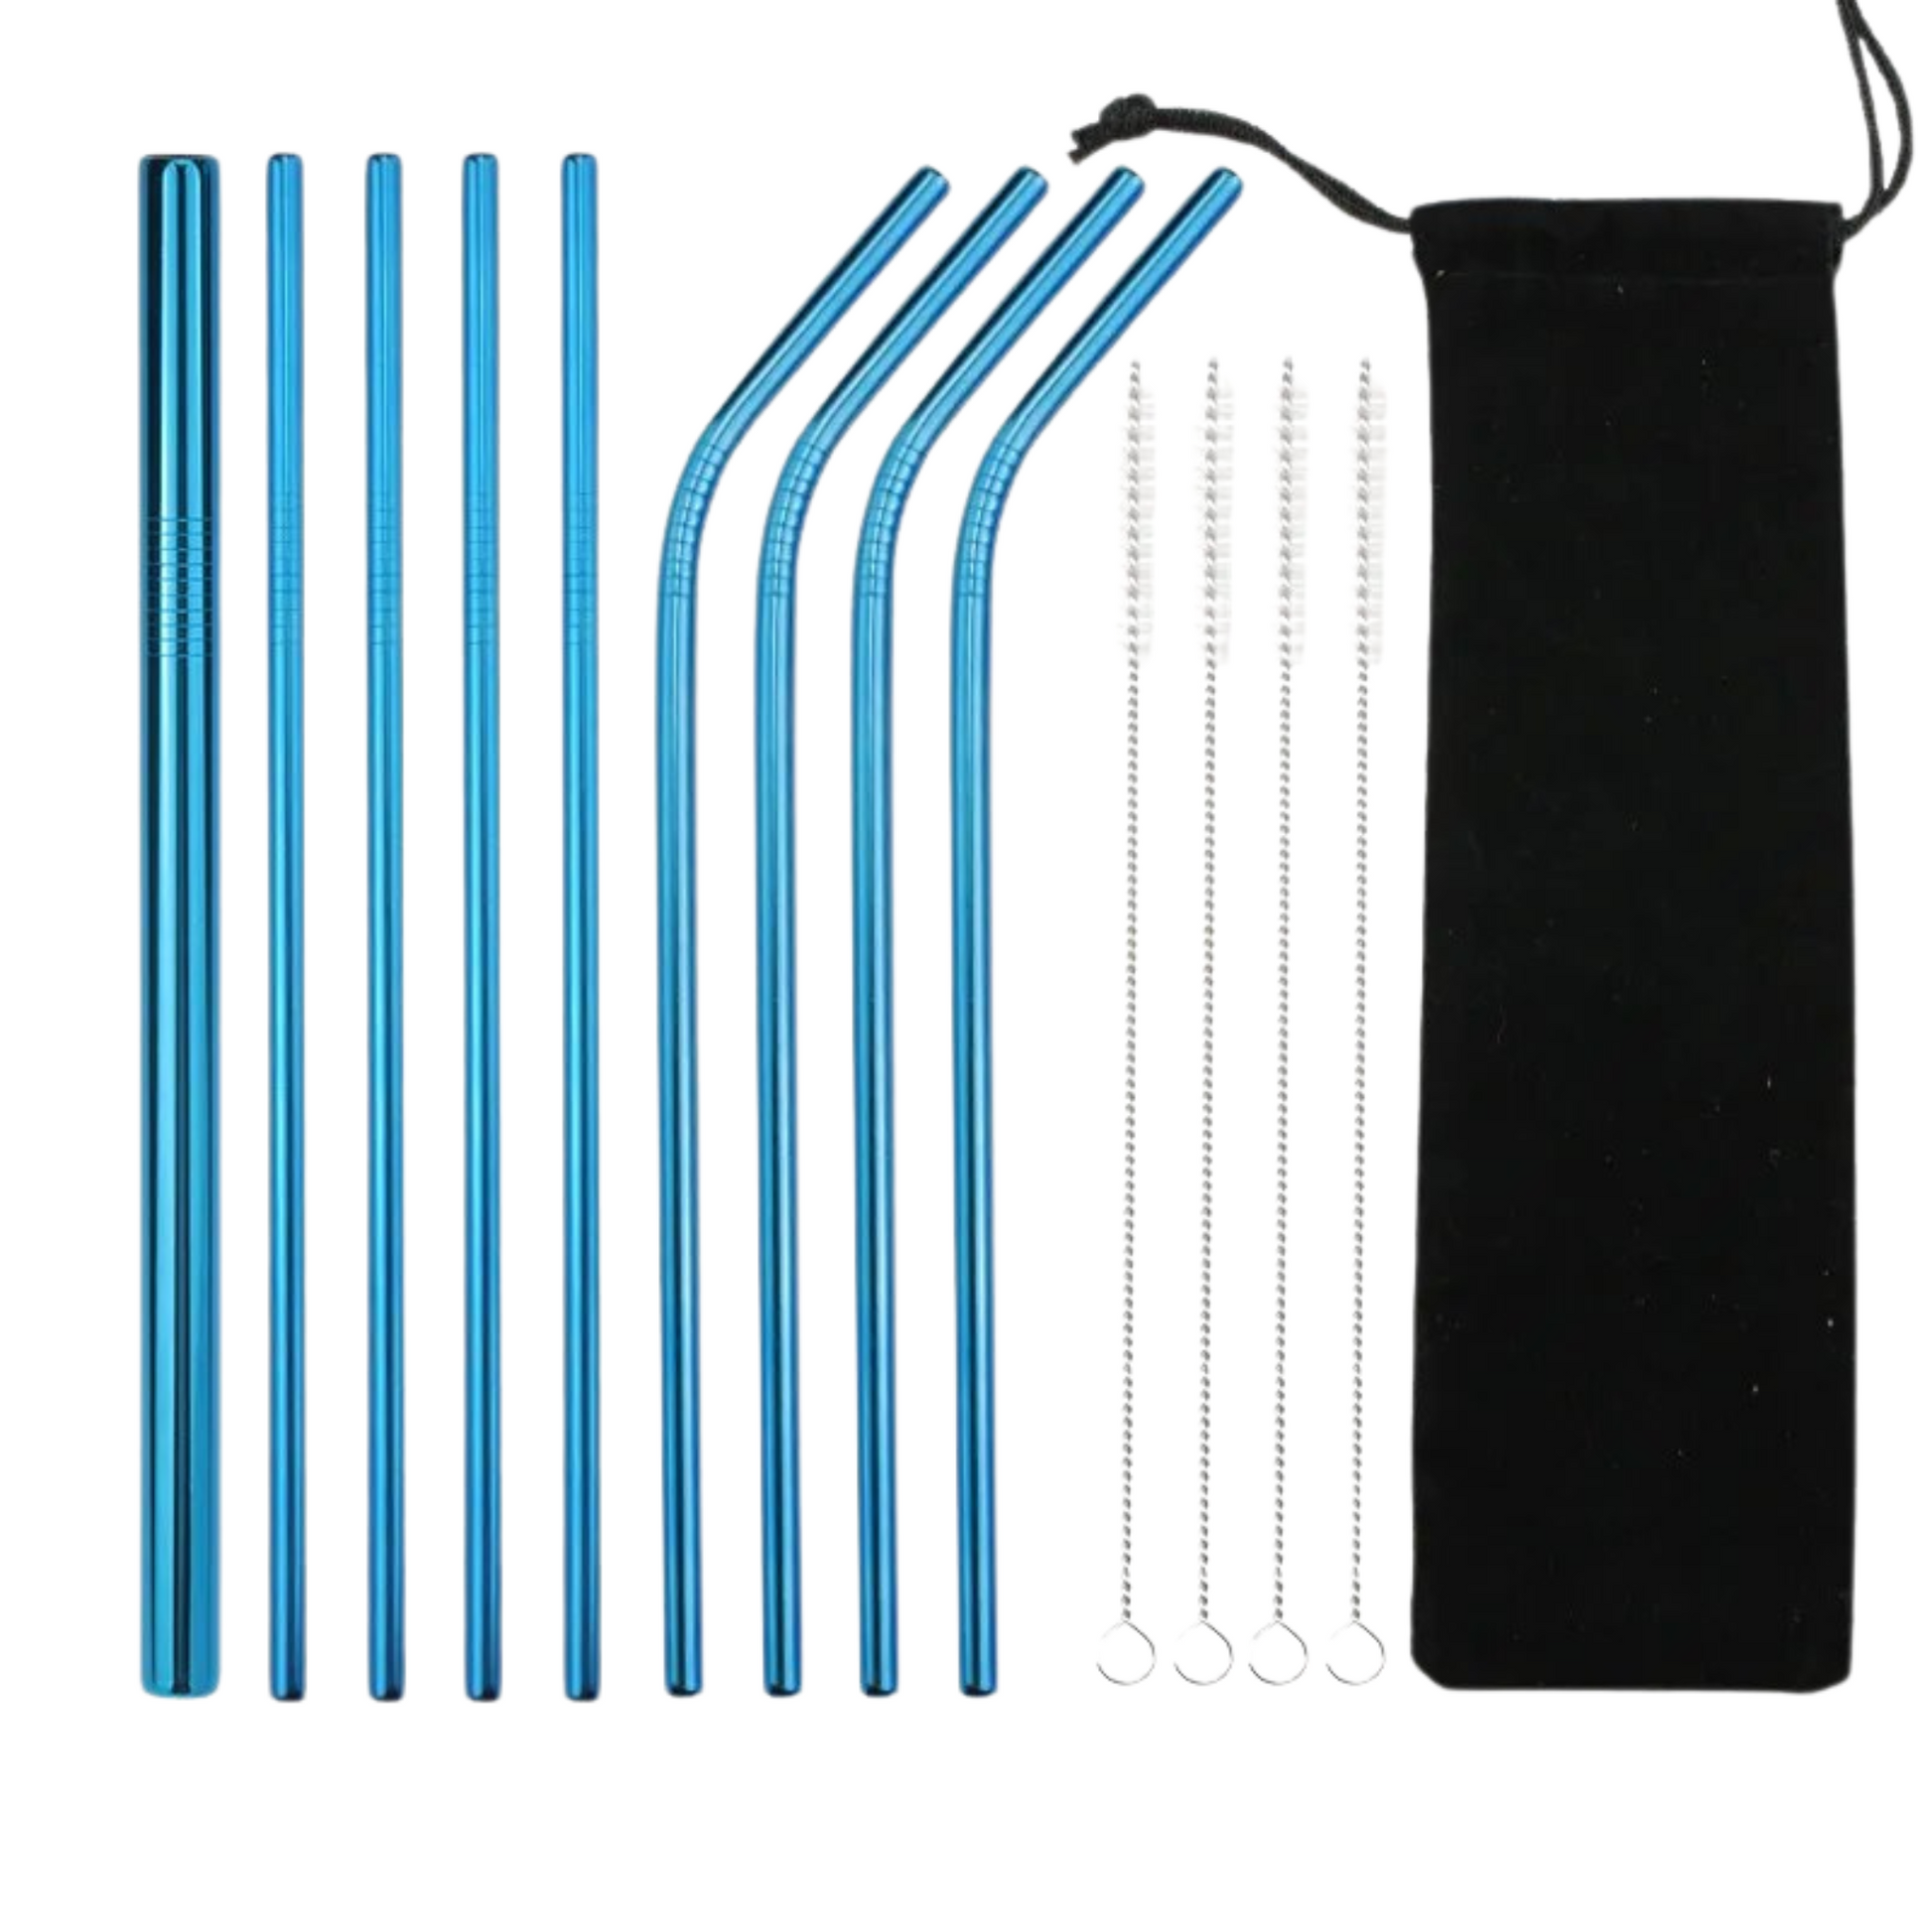 9 blue Stainless Steel Reusable Straws with  cleaning brushes and a bag